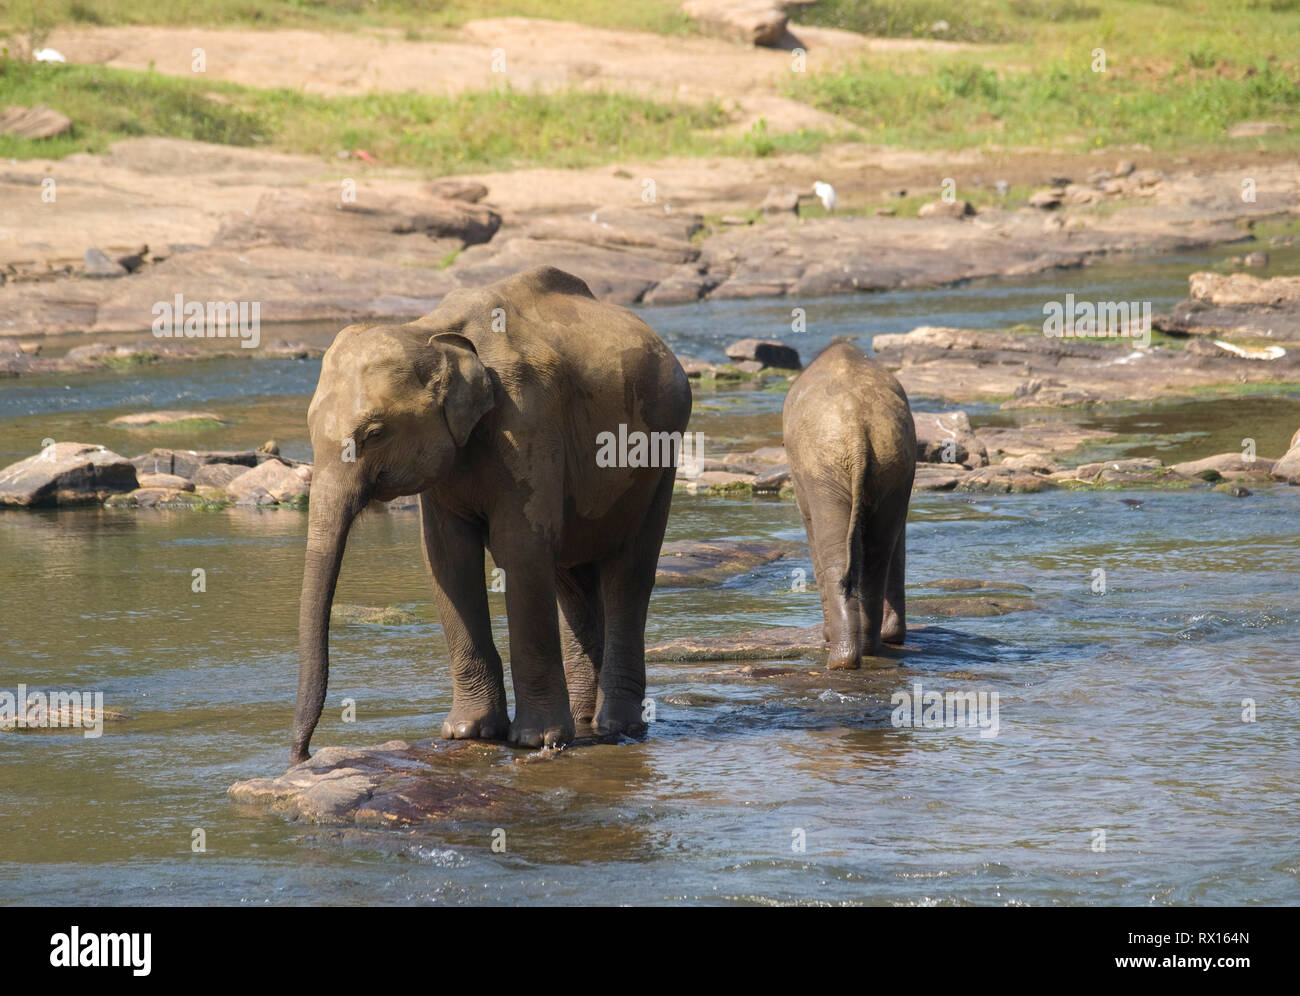 Two young elephants in the river Stock Photo